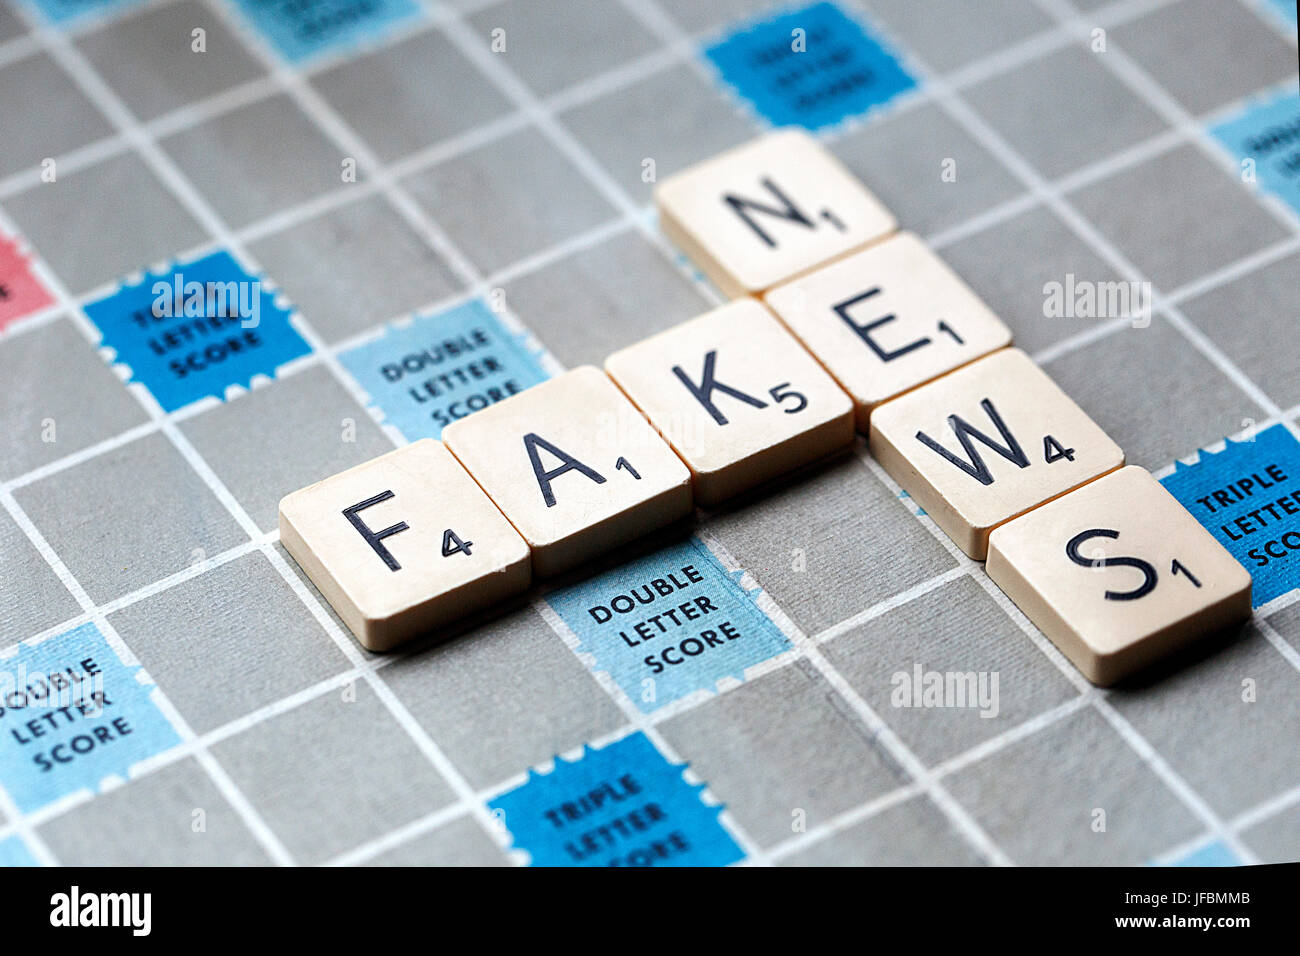 A Scrabble game board with the letters forming the words 'Fake News'. Scrabble is a fun and educational game distributed worldwide by Hasbro. Stock Photo